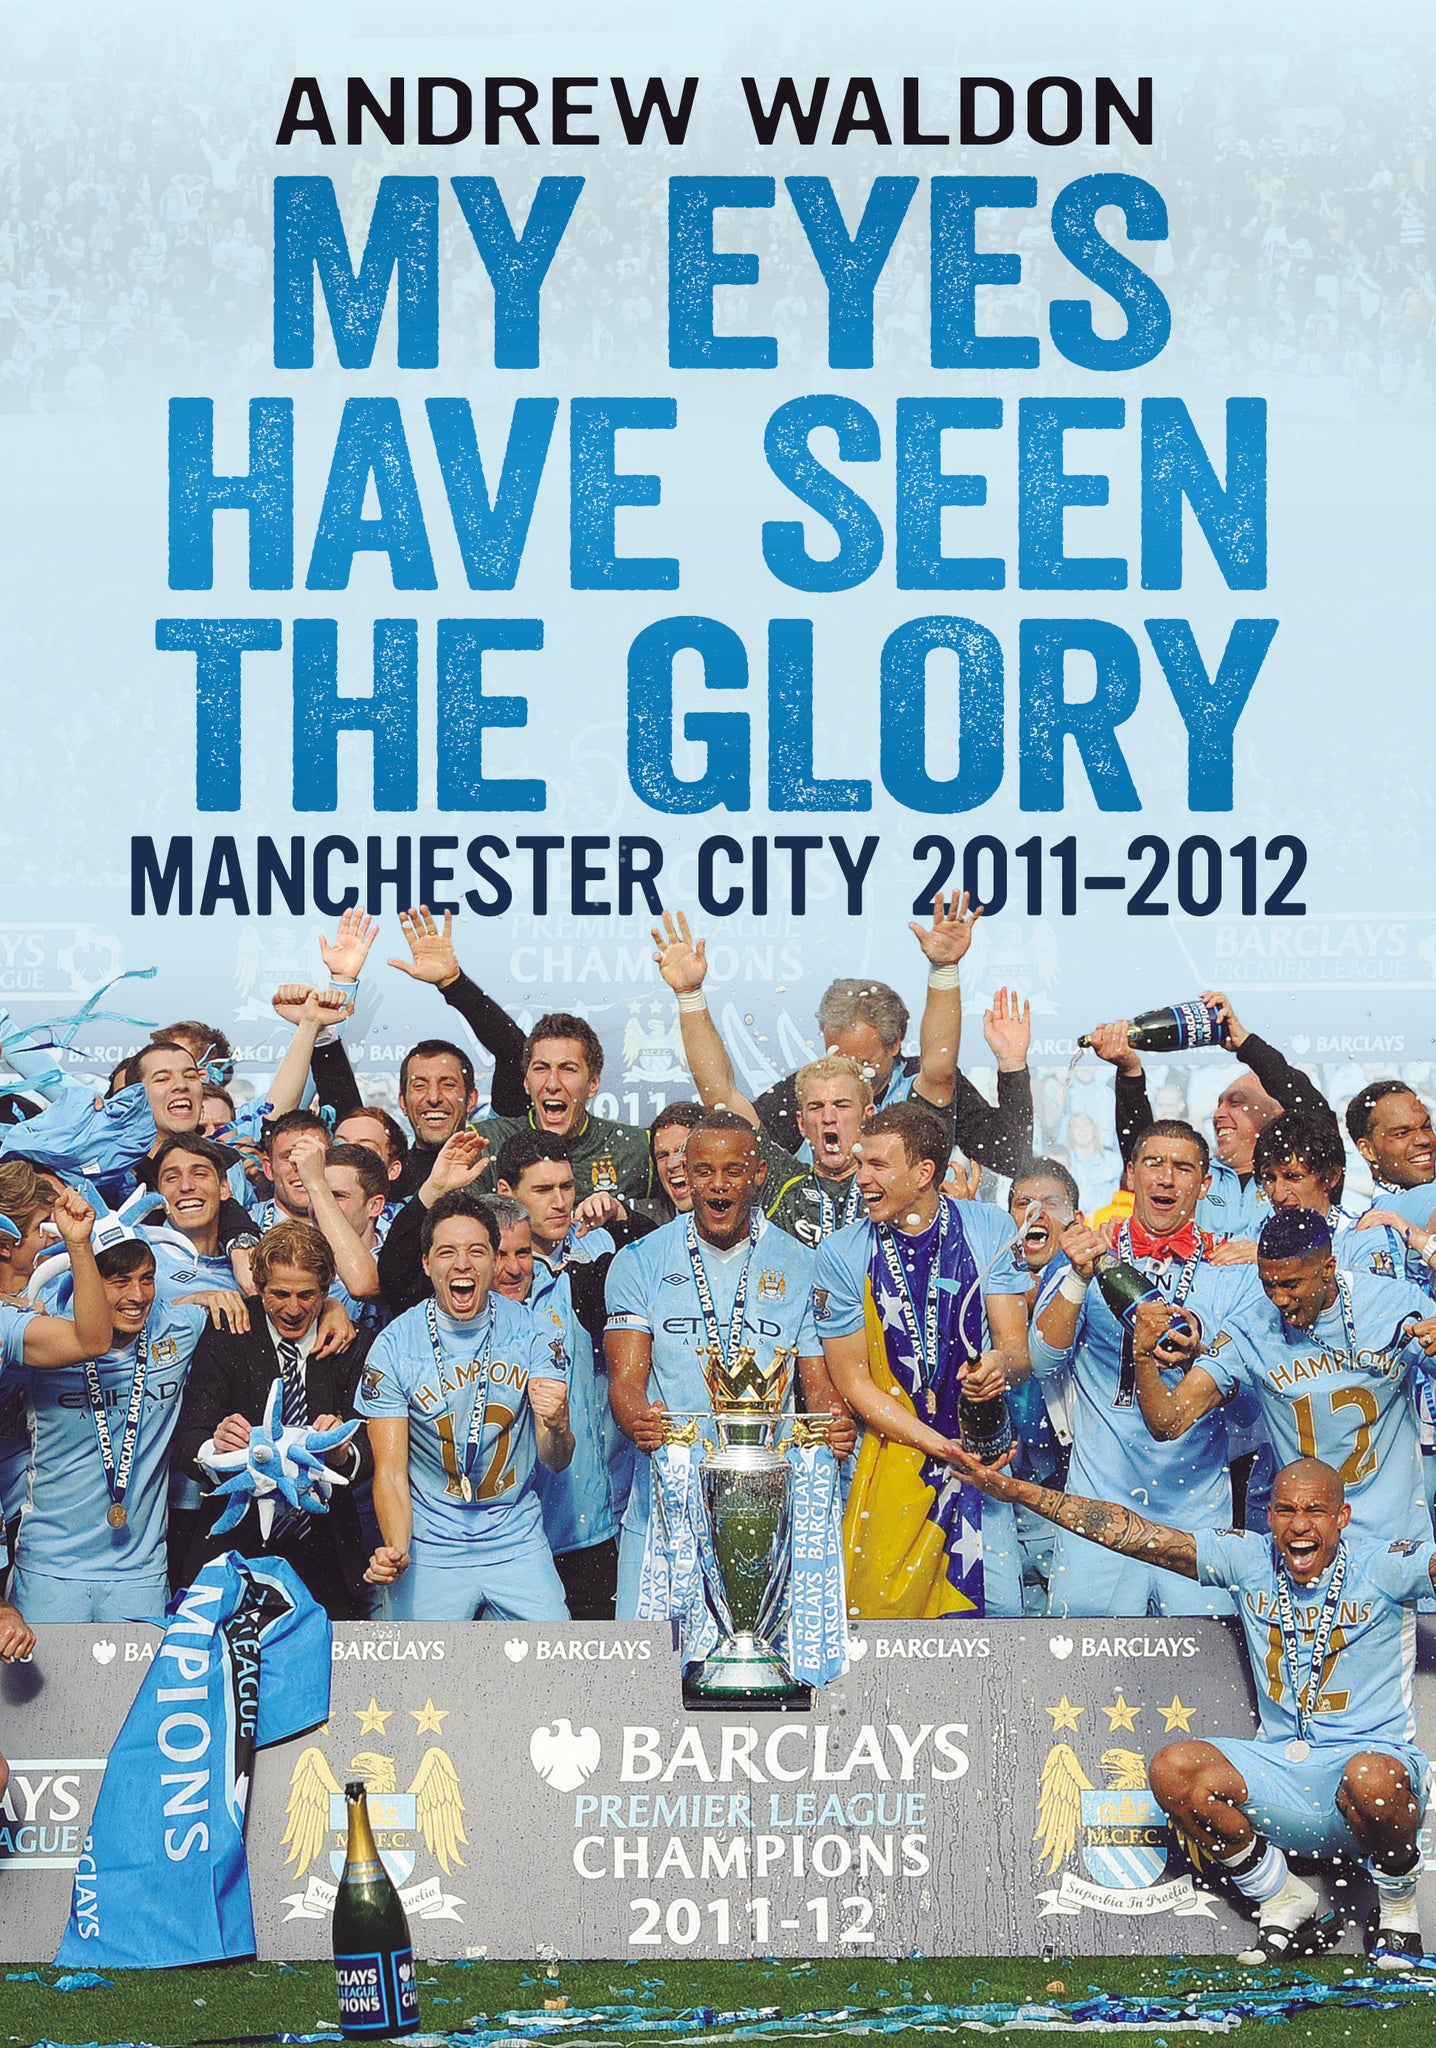 My Eyes Have Seen the Glory: Manchester City 2011-2012